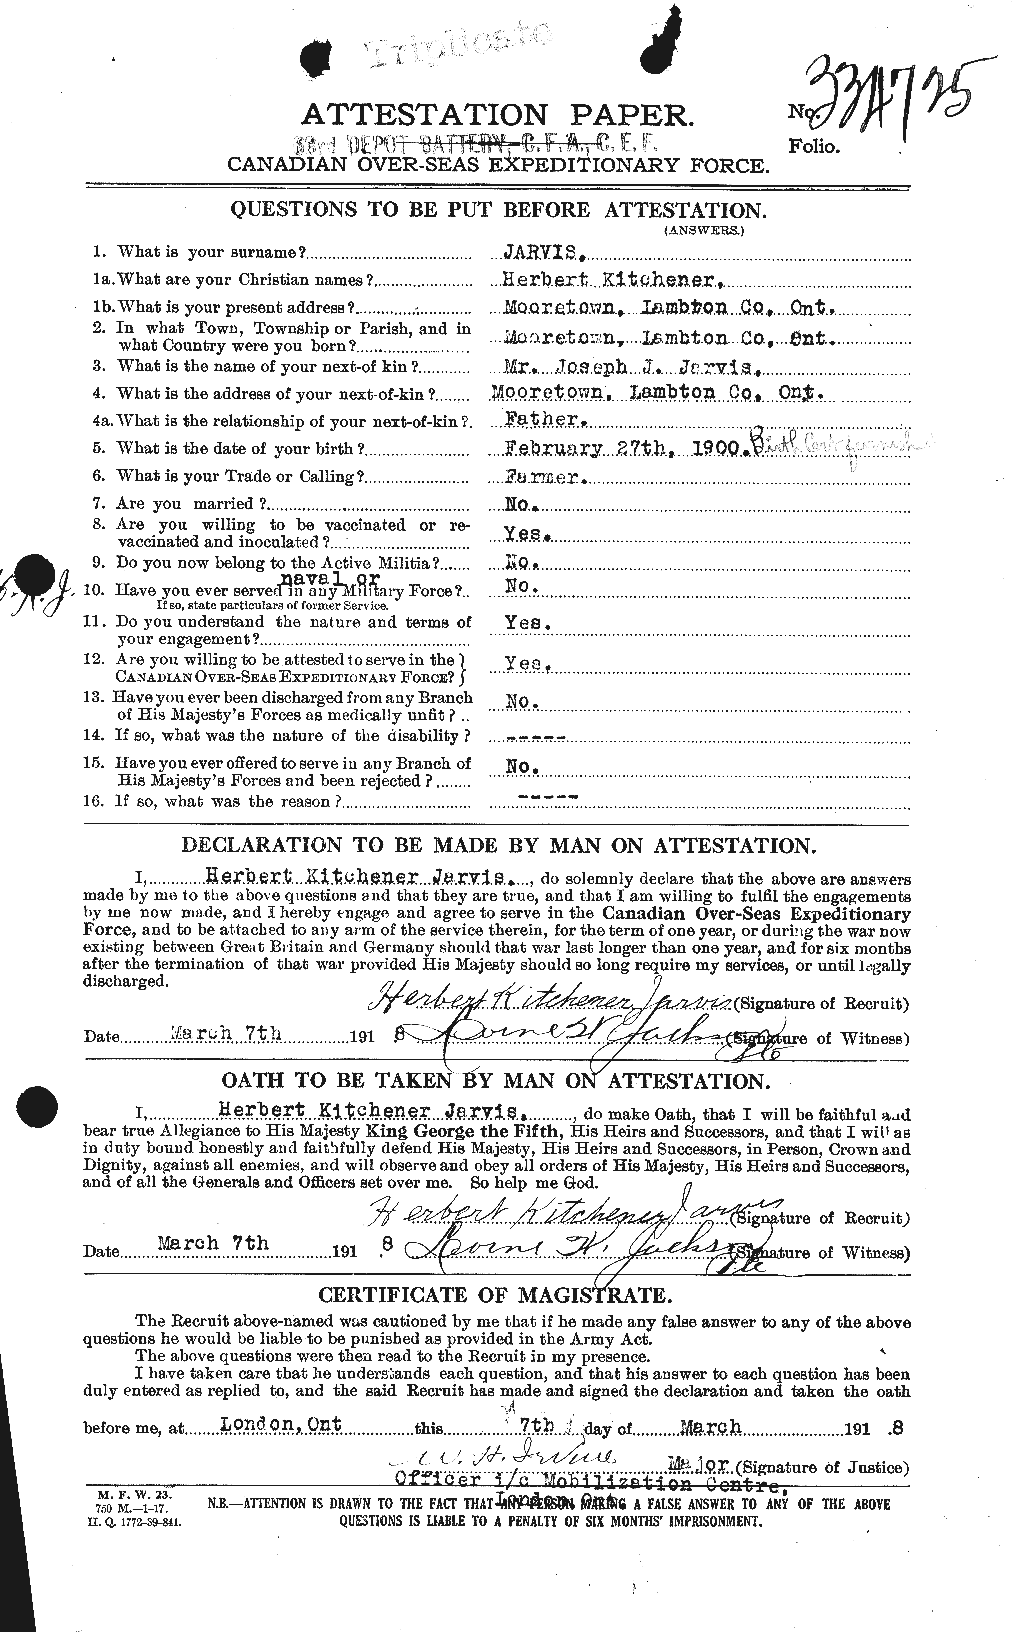 Personnel Records of the First World War - CEF 414736a